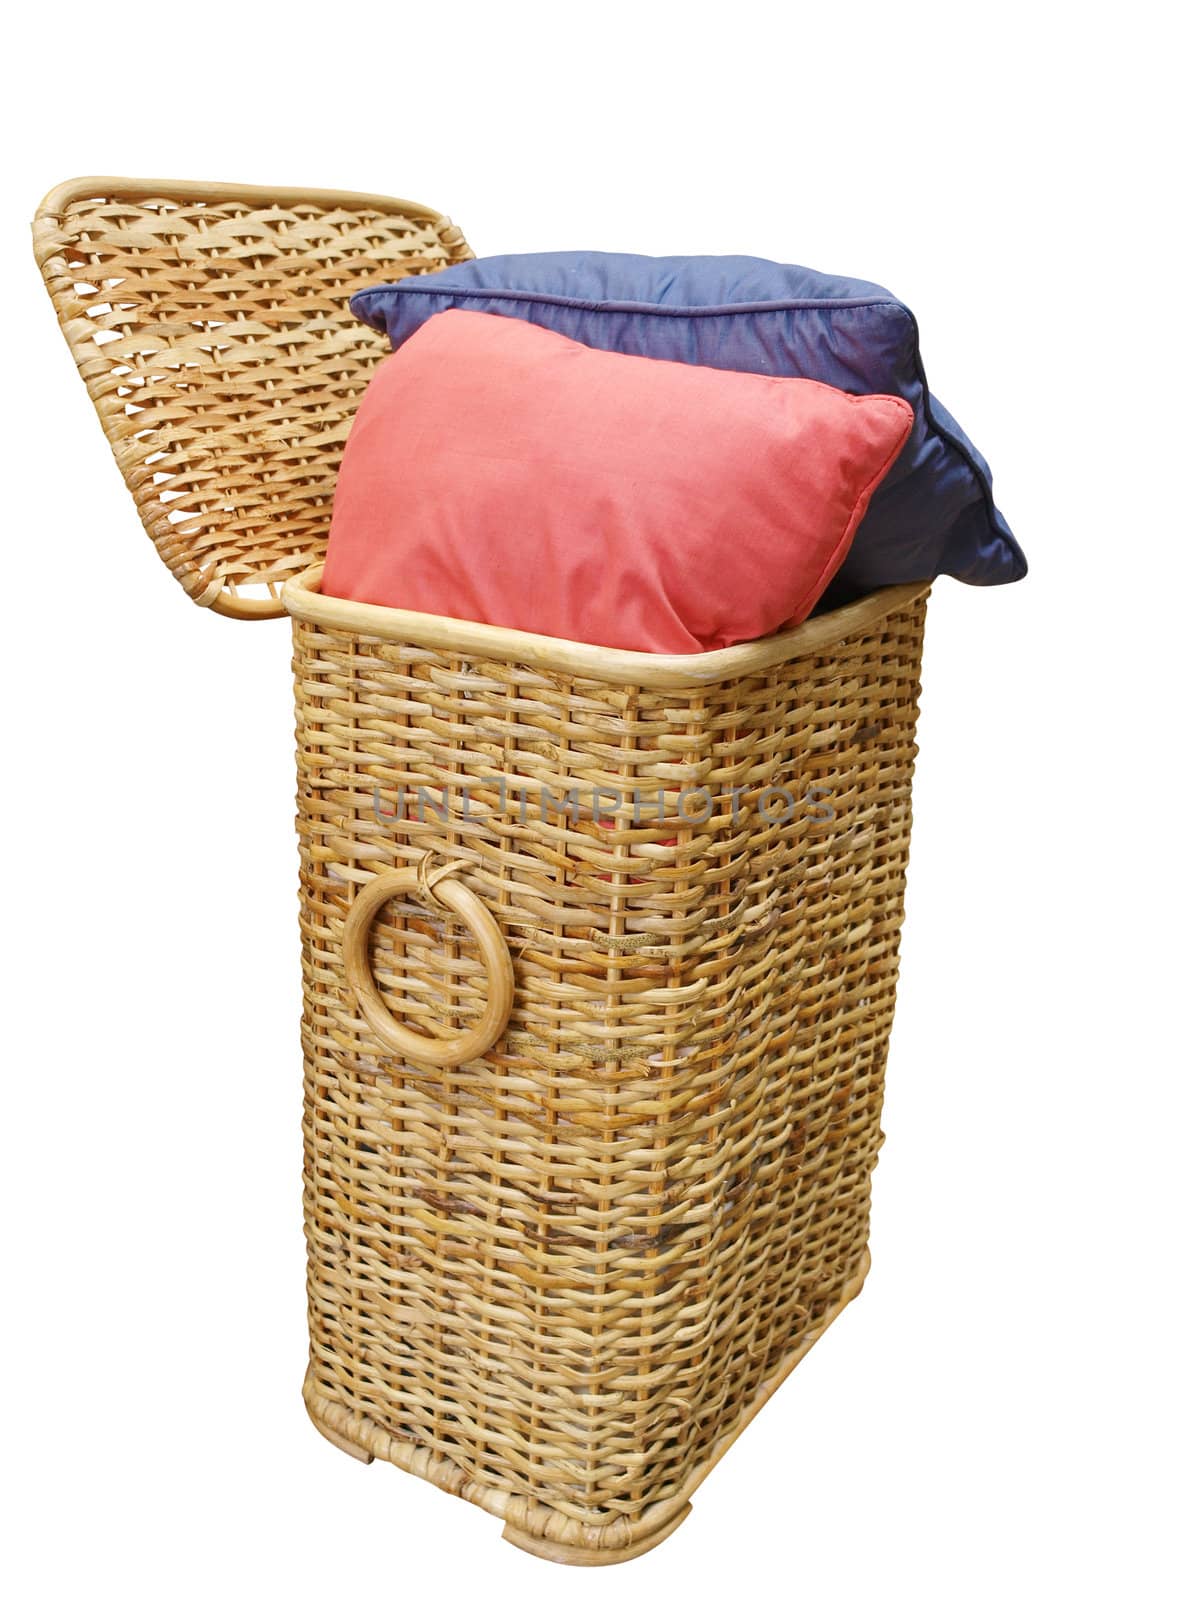 Two Cushions in a cane Hamper by MargoJH